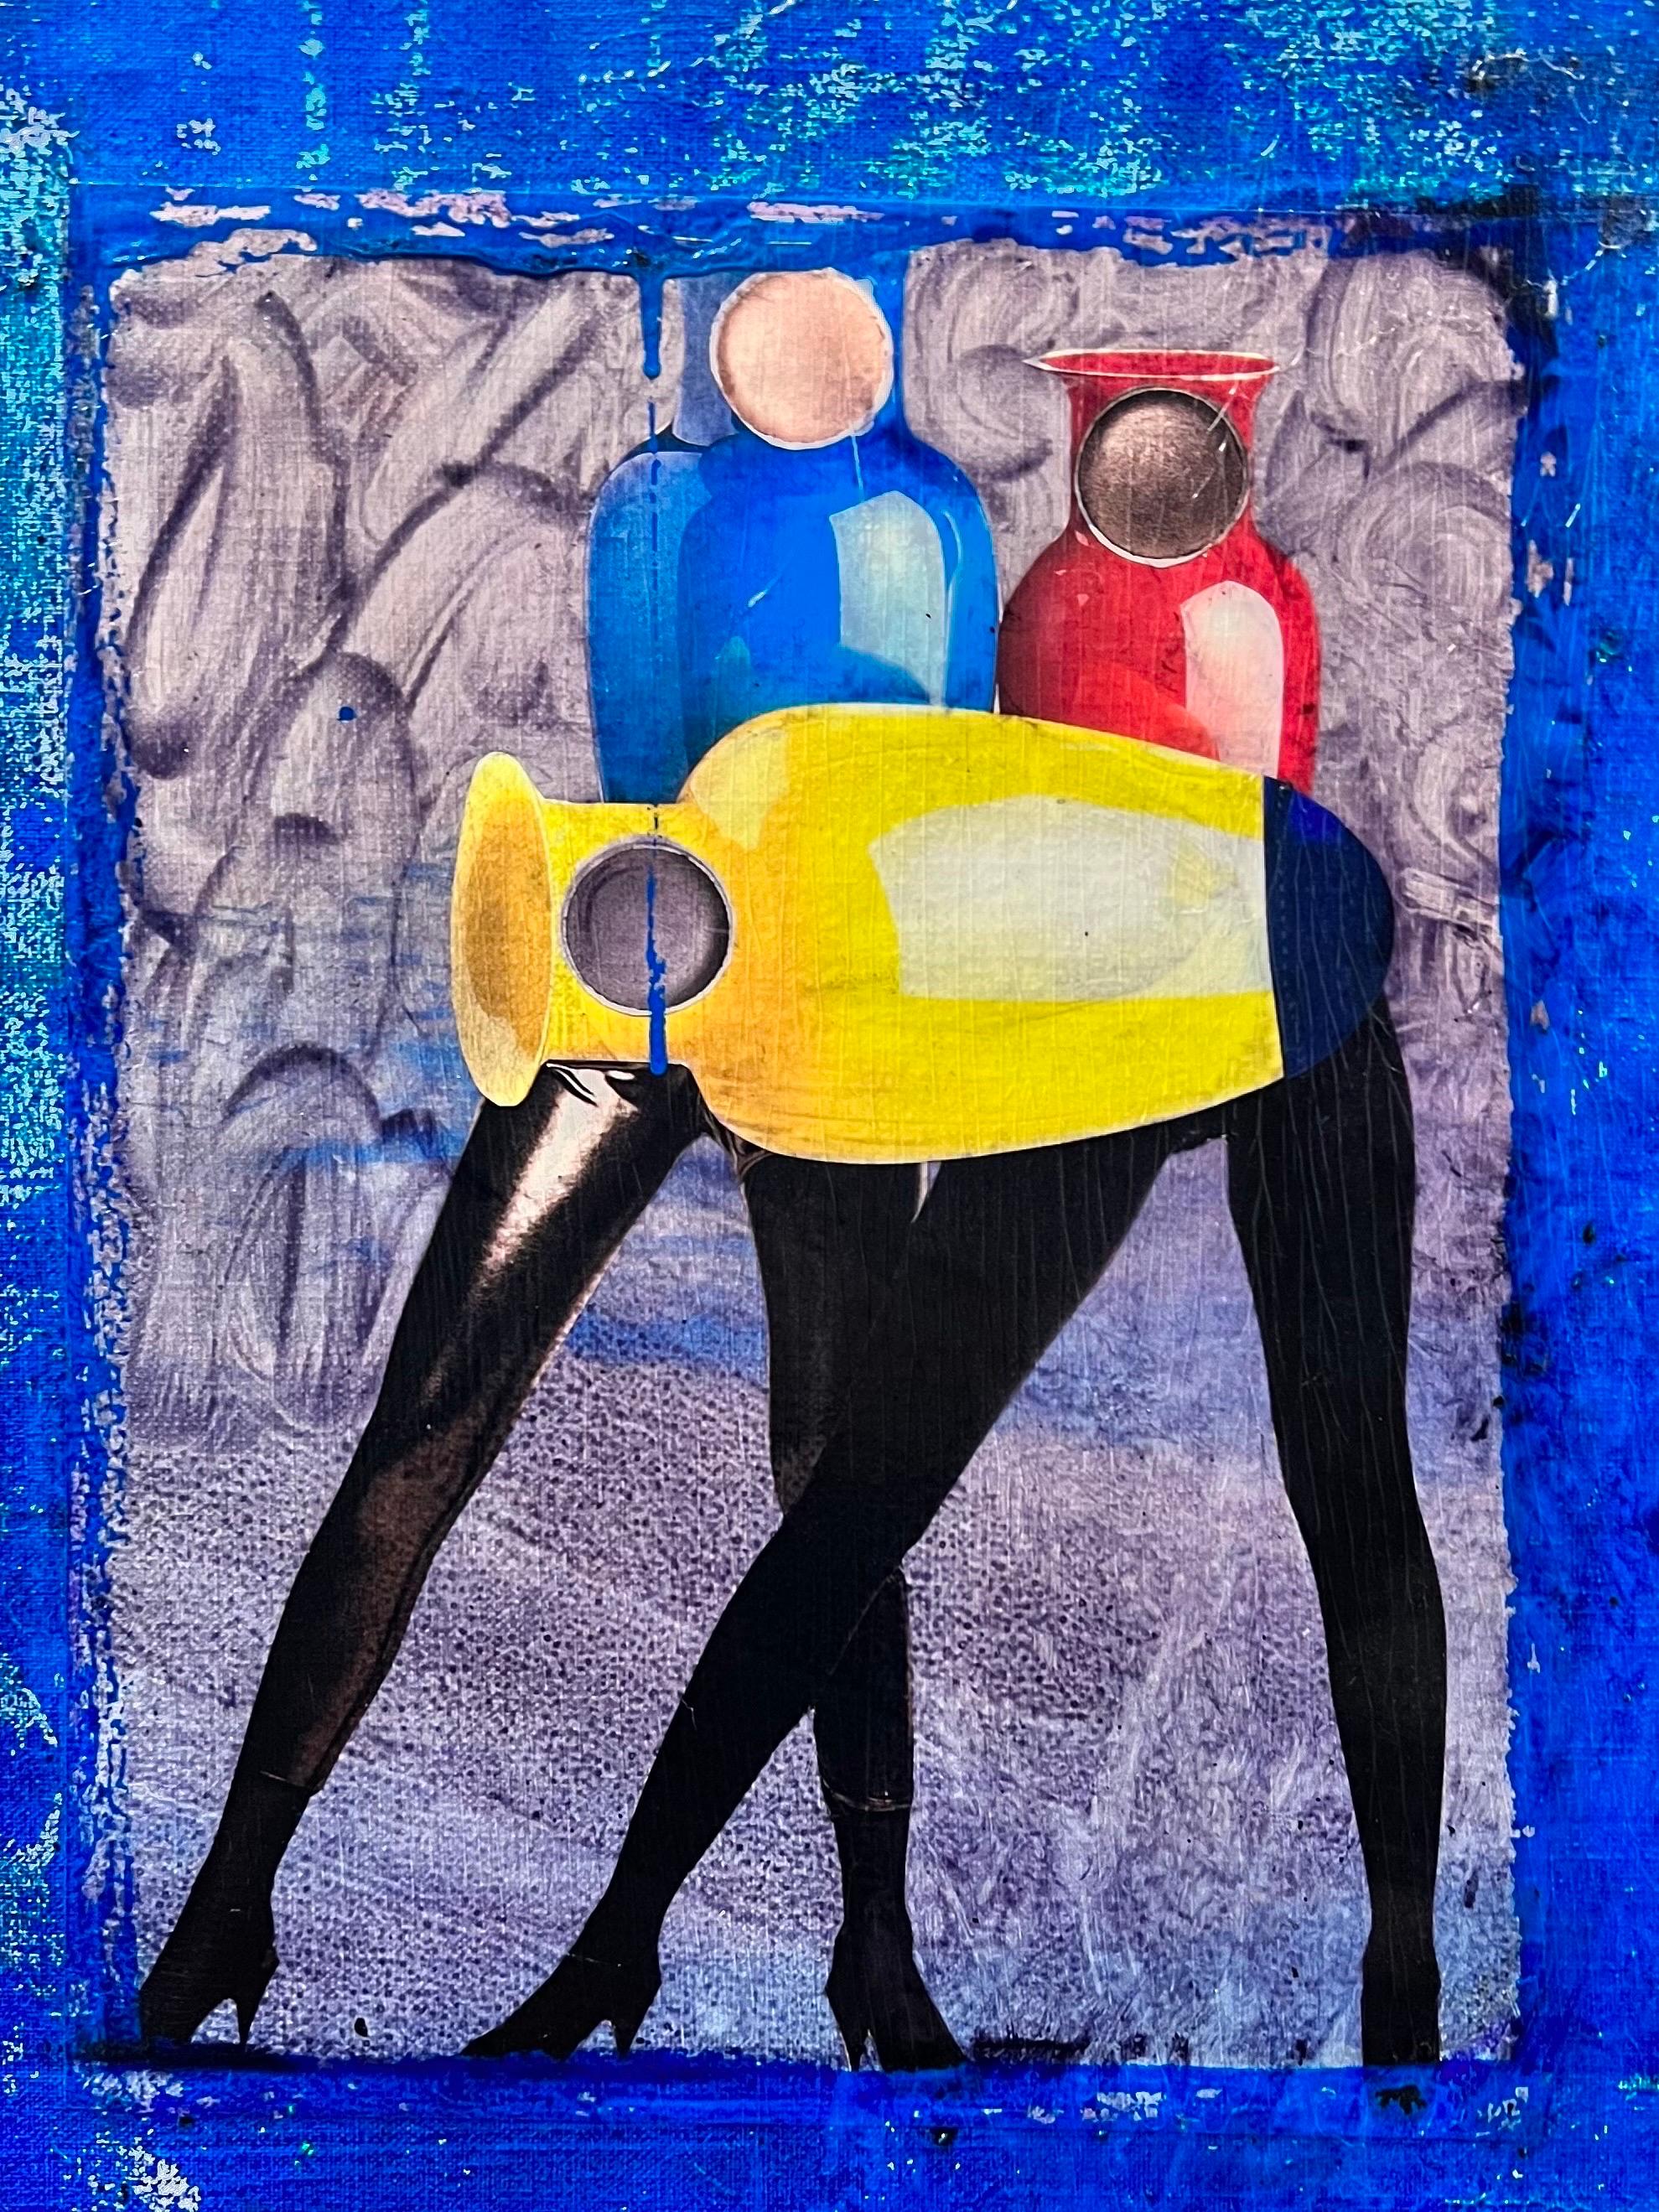 20th Century French School Figurative Painting - 1980's French Abstract Collage/ Painting Leather Trousersed Figures with Jugs